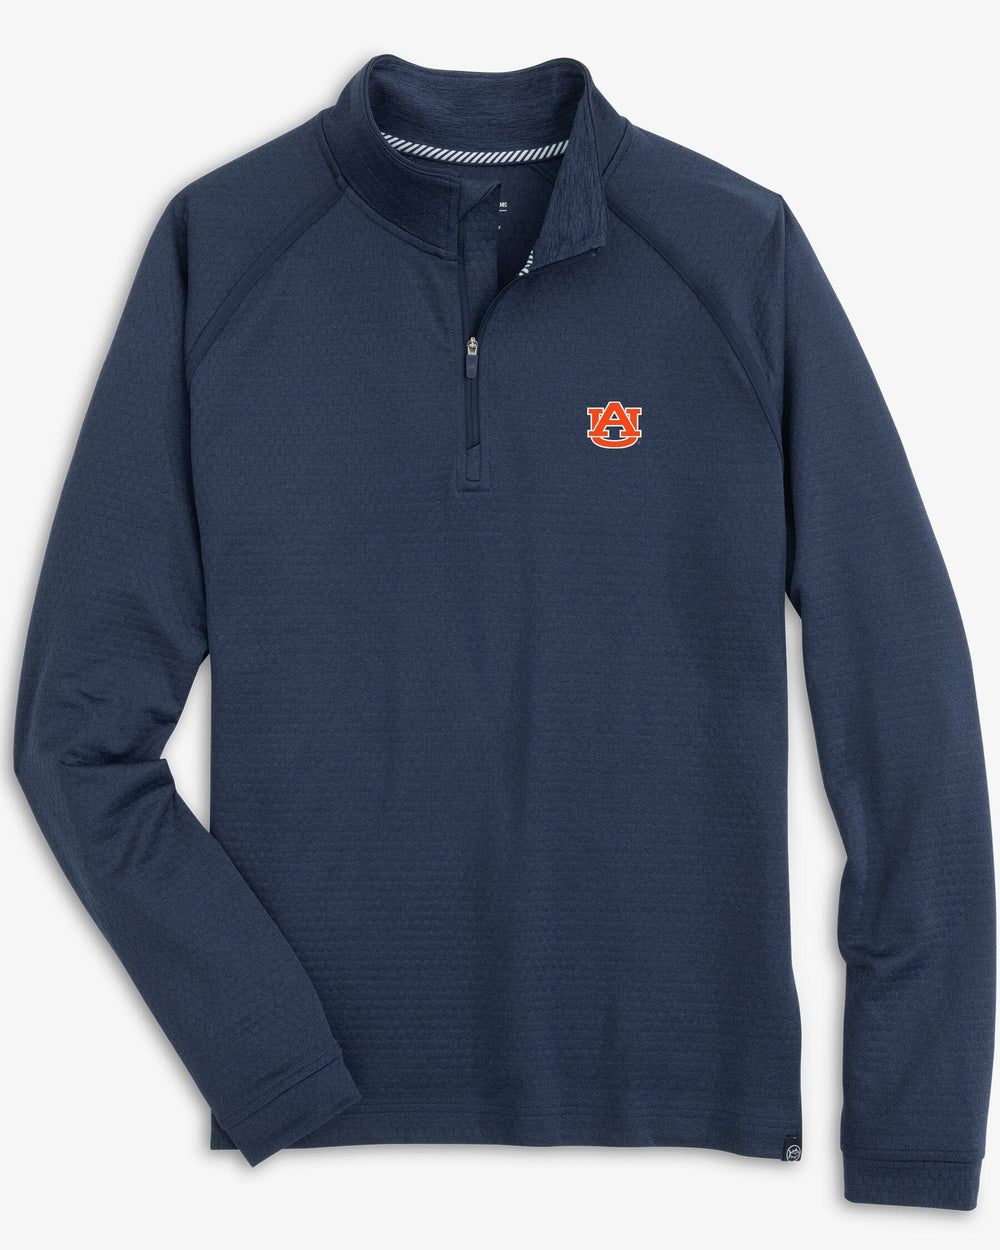 The front view of the Auburn Tigers Scuttle Heather Quarter Zip by Southern Tide - Heather True Navy